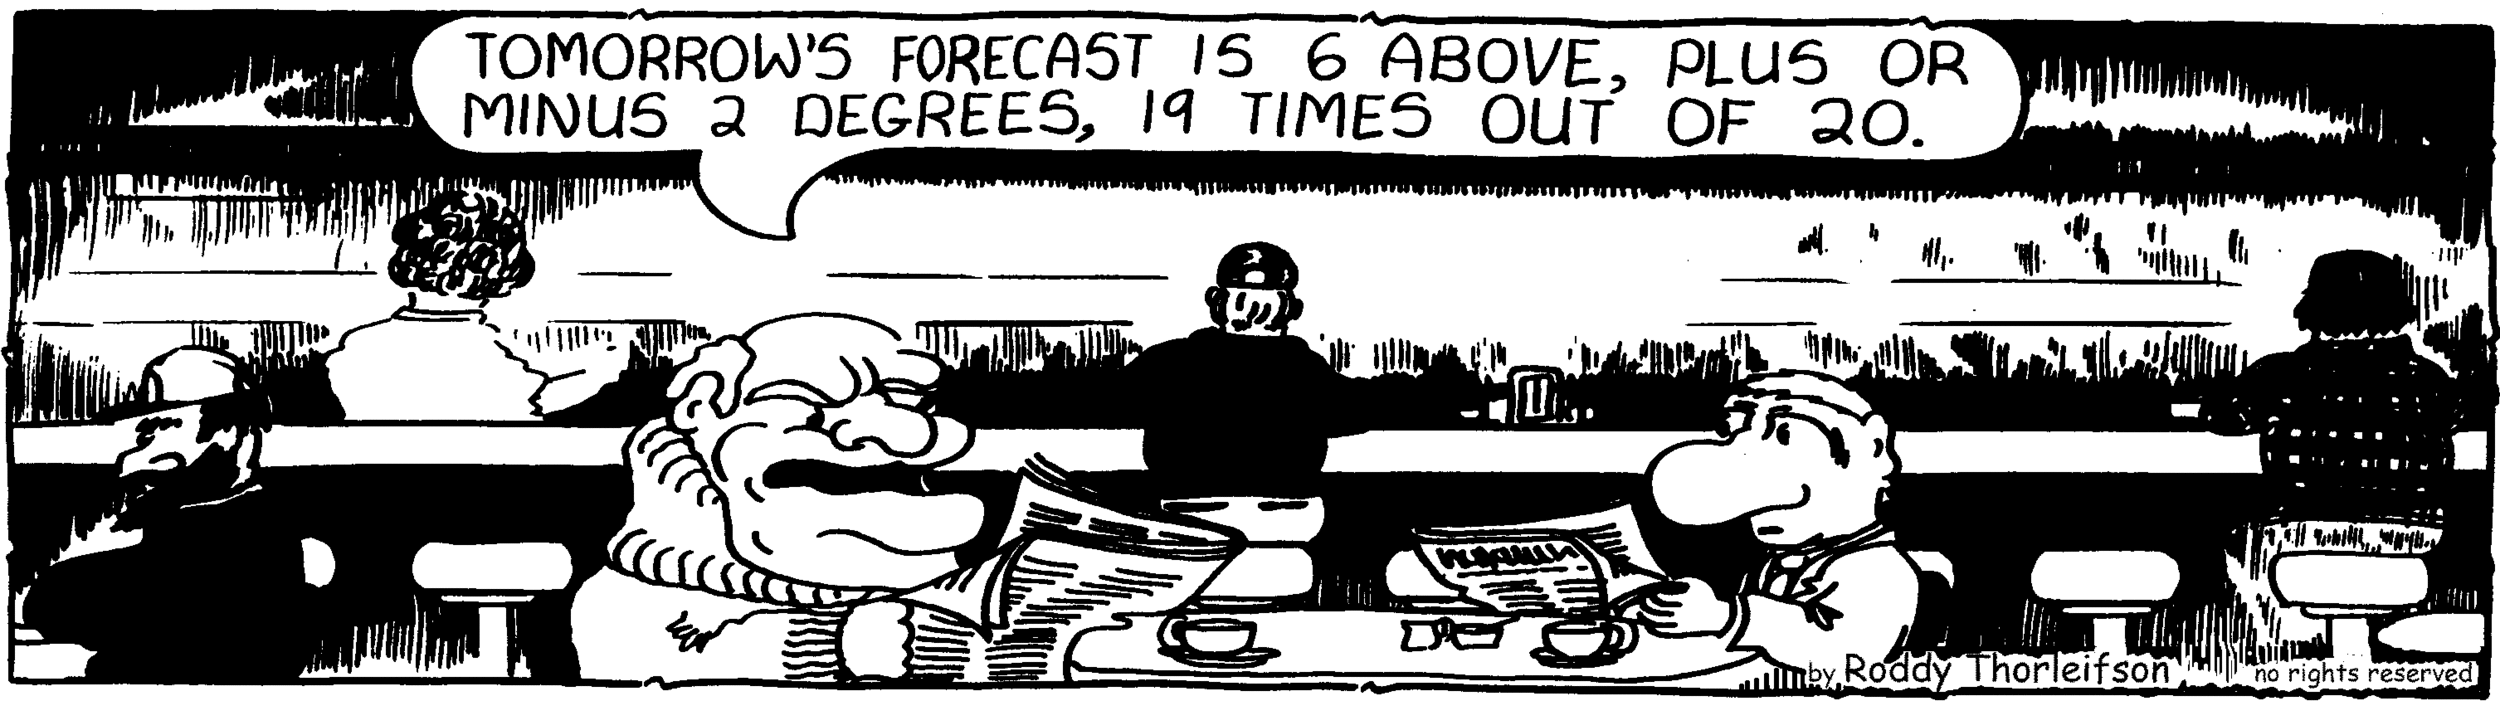 cartoon about polls and a weather report